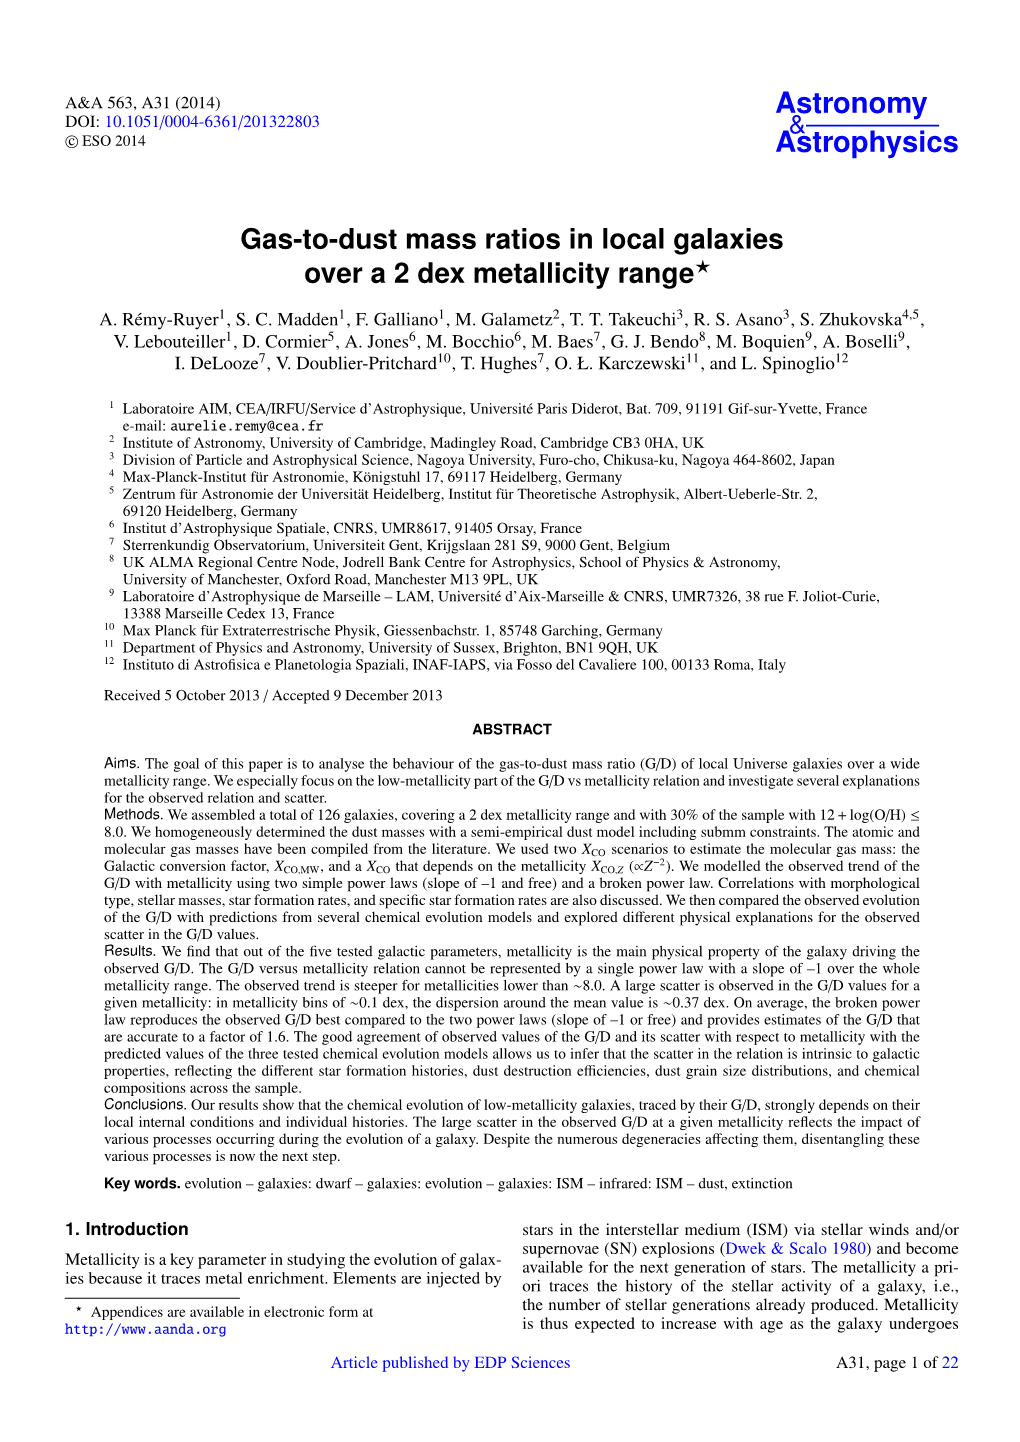 Gas-To-Dust Mass Ratios in Local Galaxies Over a 2 Dex Metallicity Range?